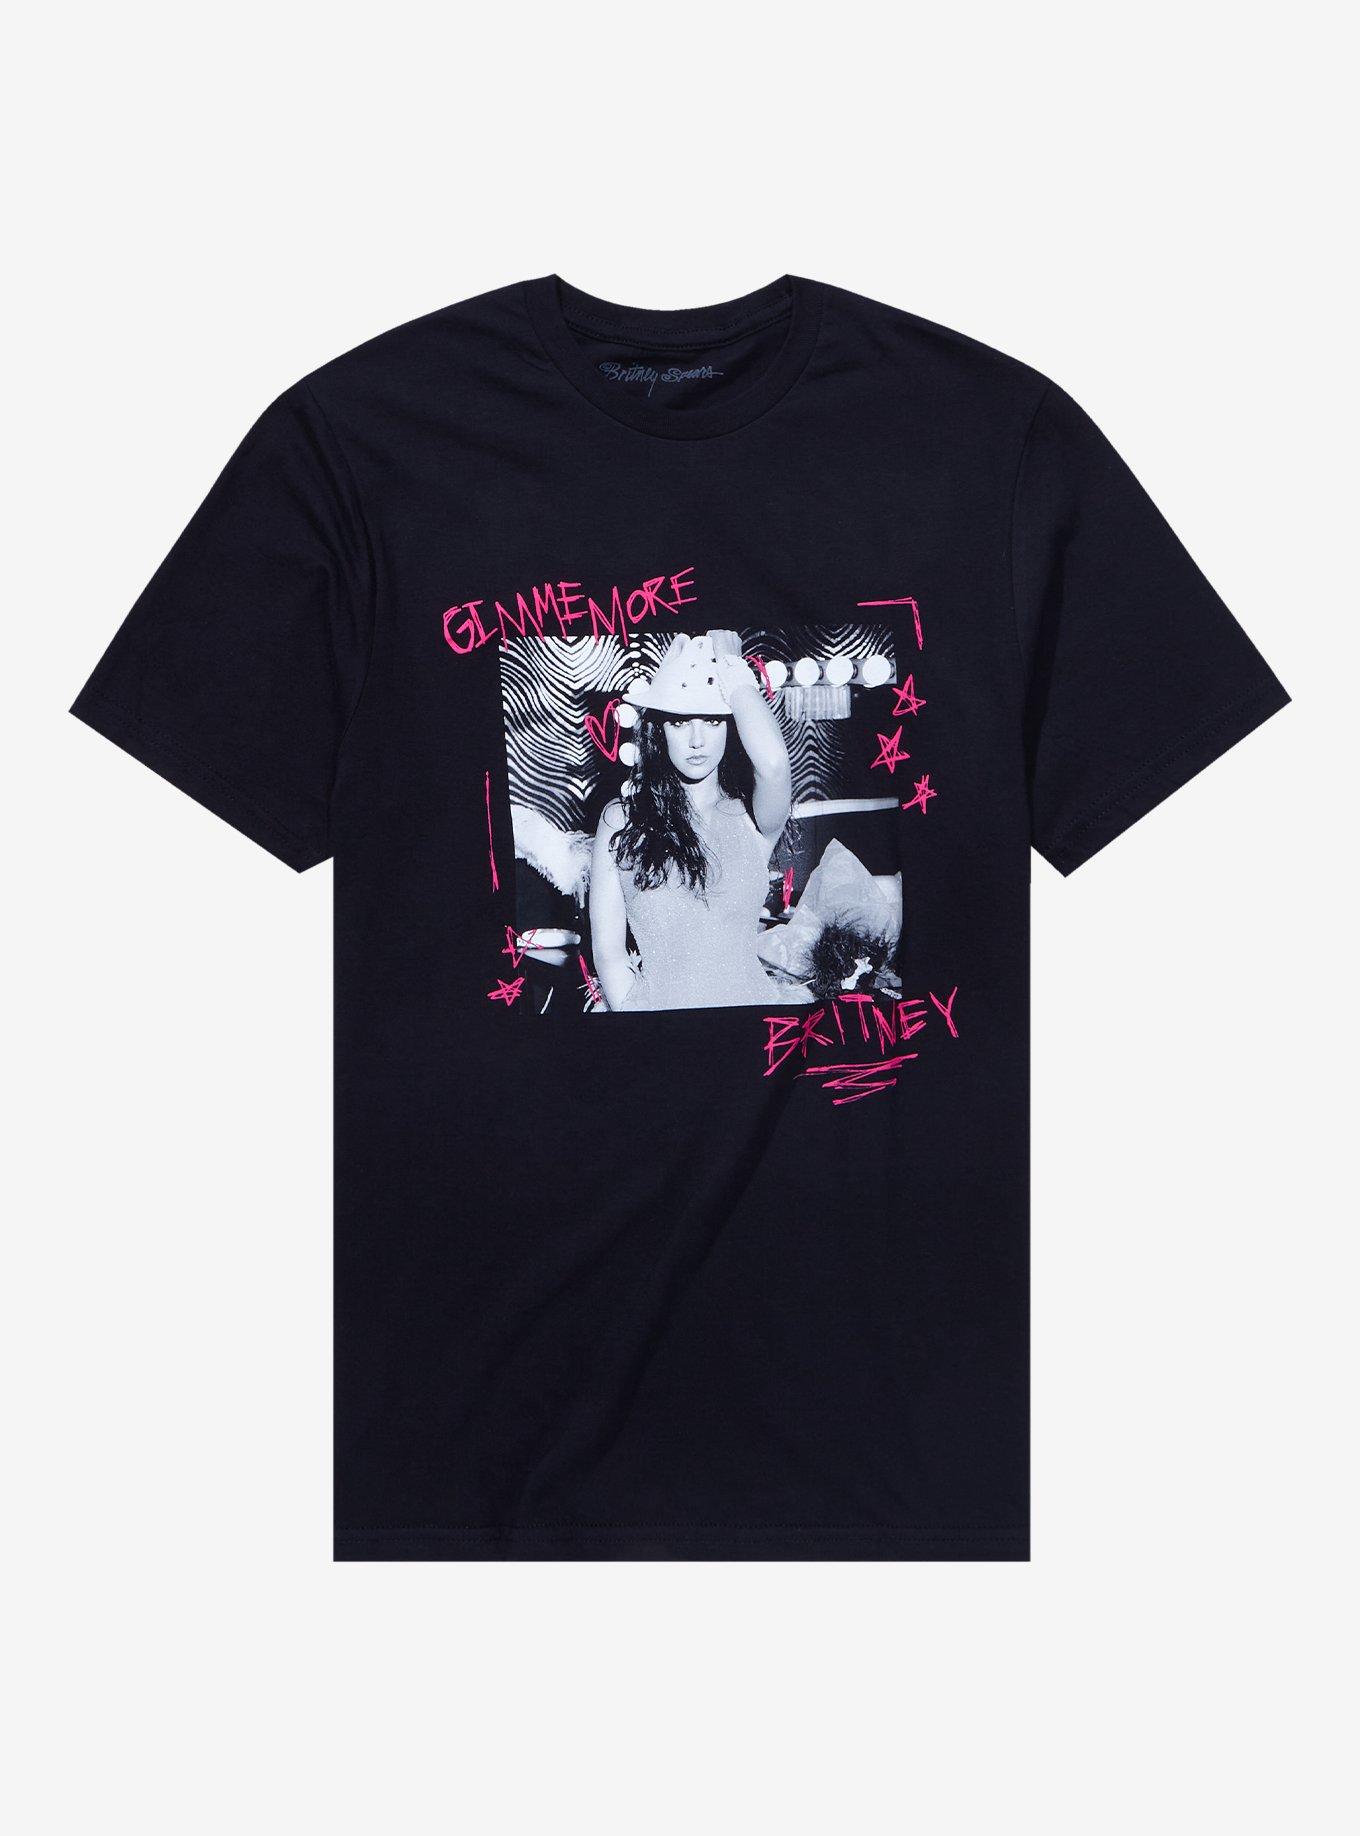 Britney Spears Gimme More Boyfriend Fit Girls T-Shirt | Hot Topic